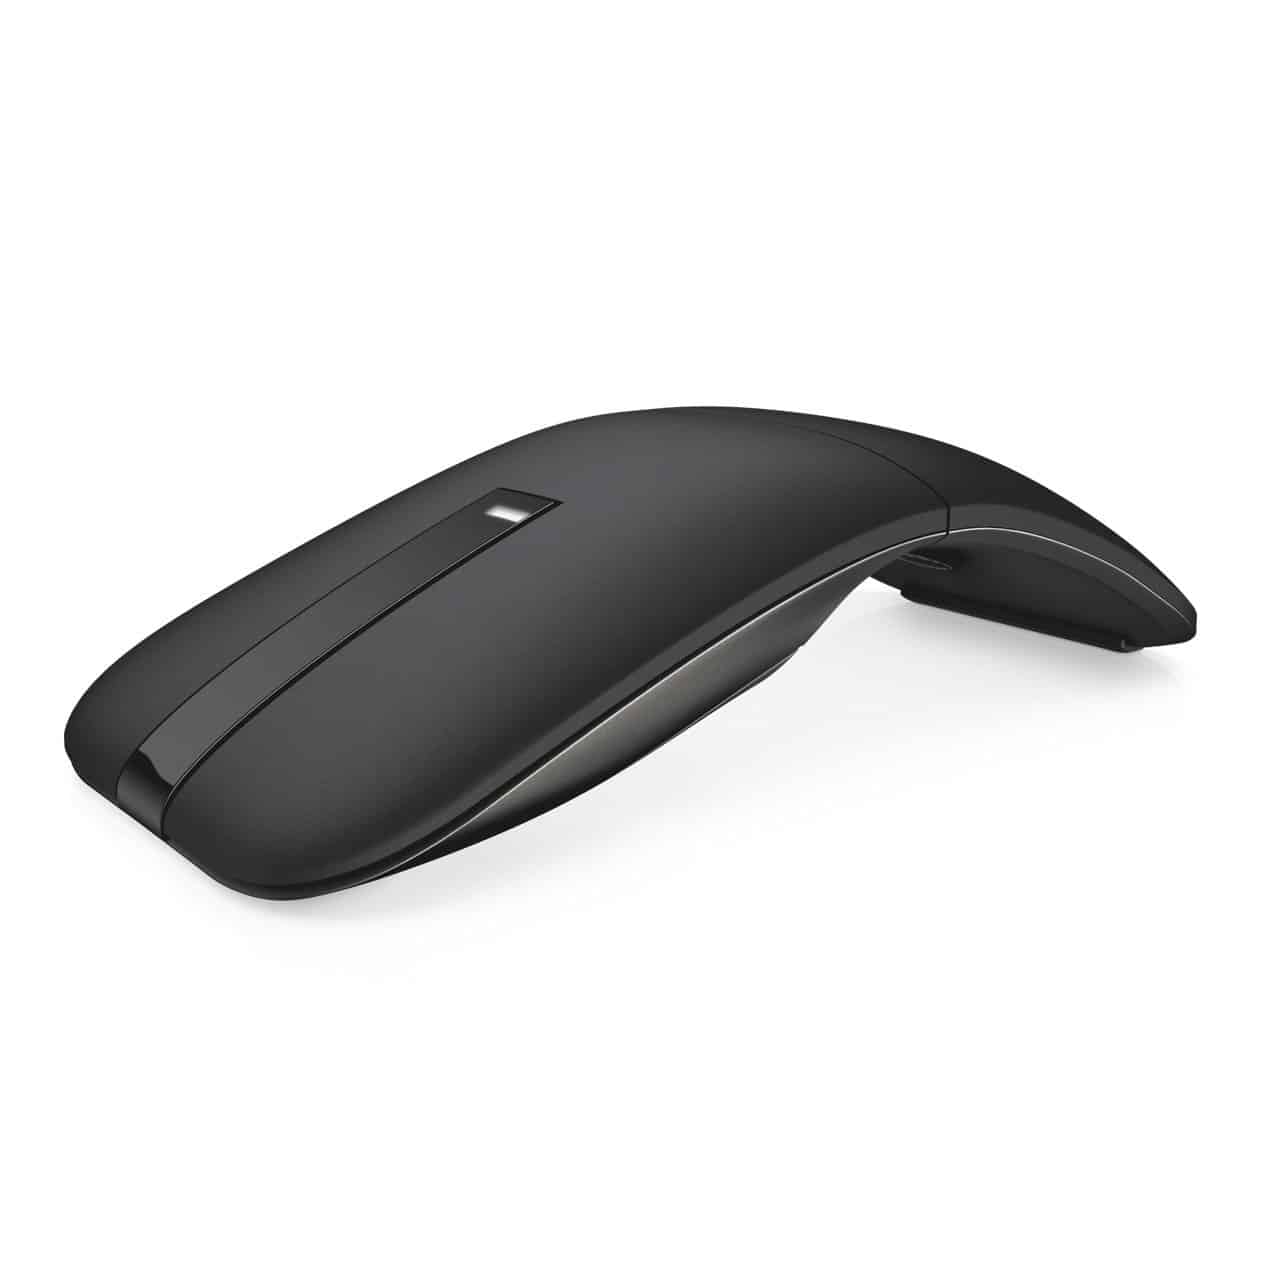 Ways to prolong your dell wireless mouse’s batteries